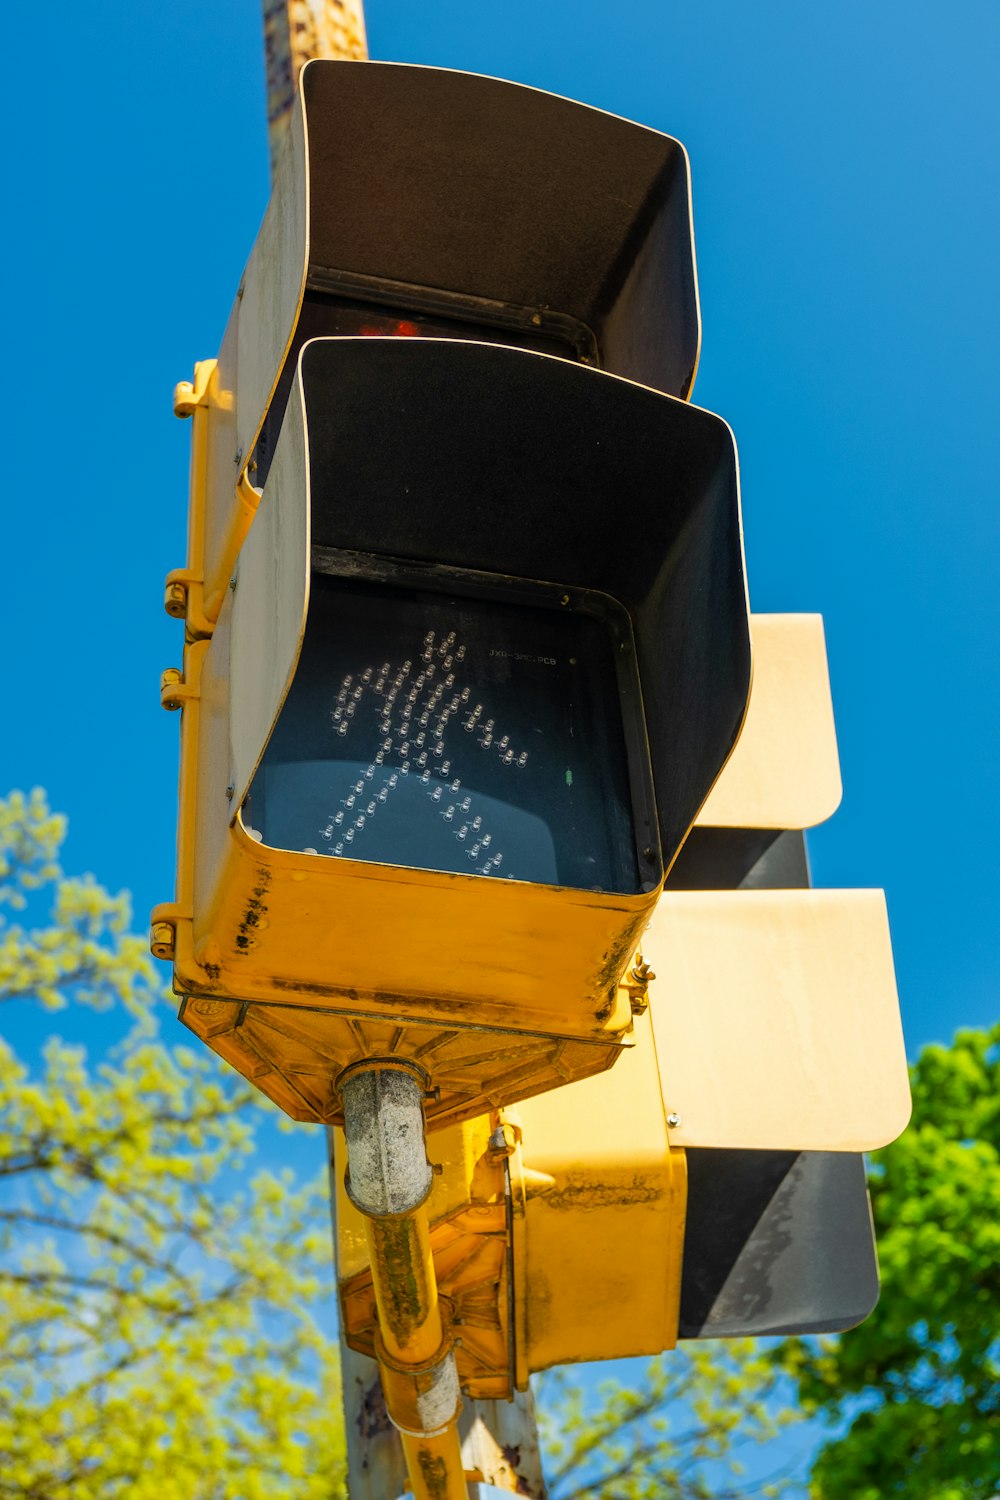 yellow traffic light turned on during daytime